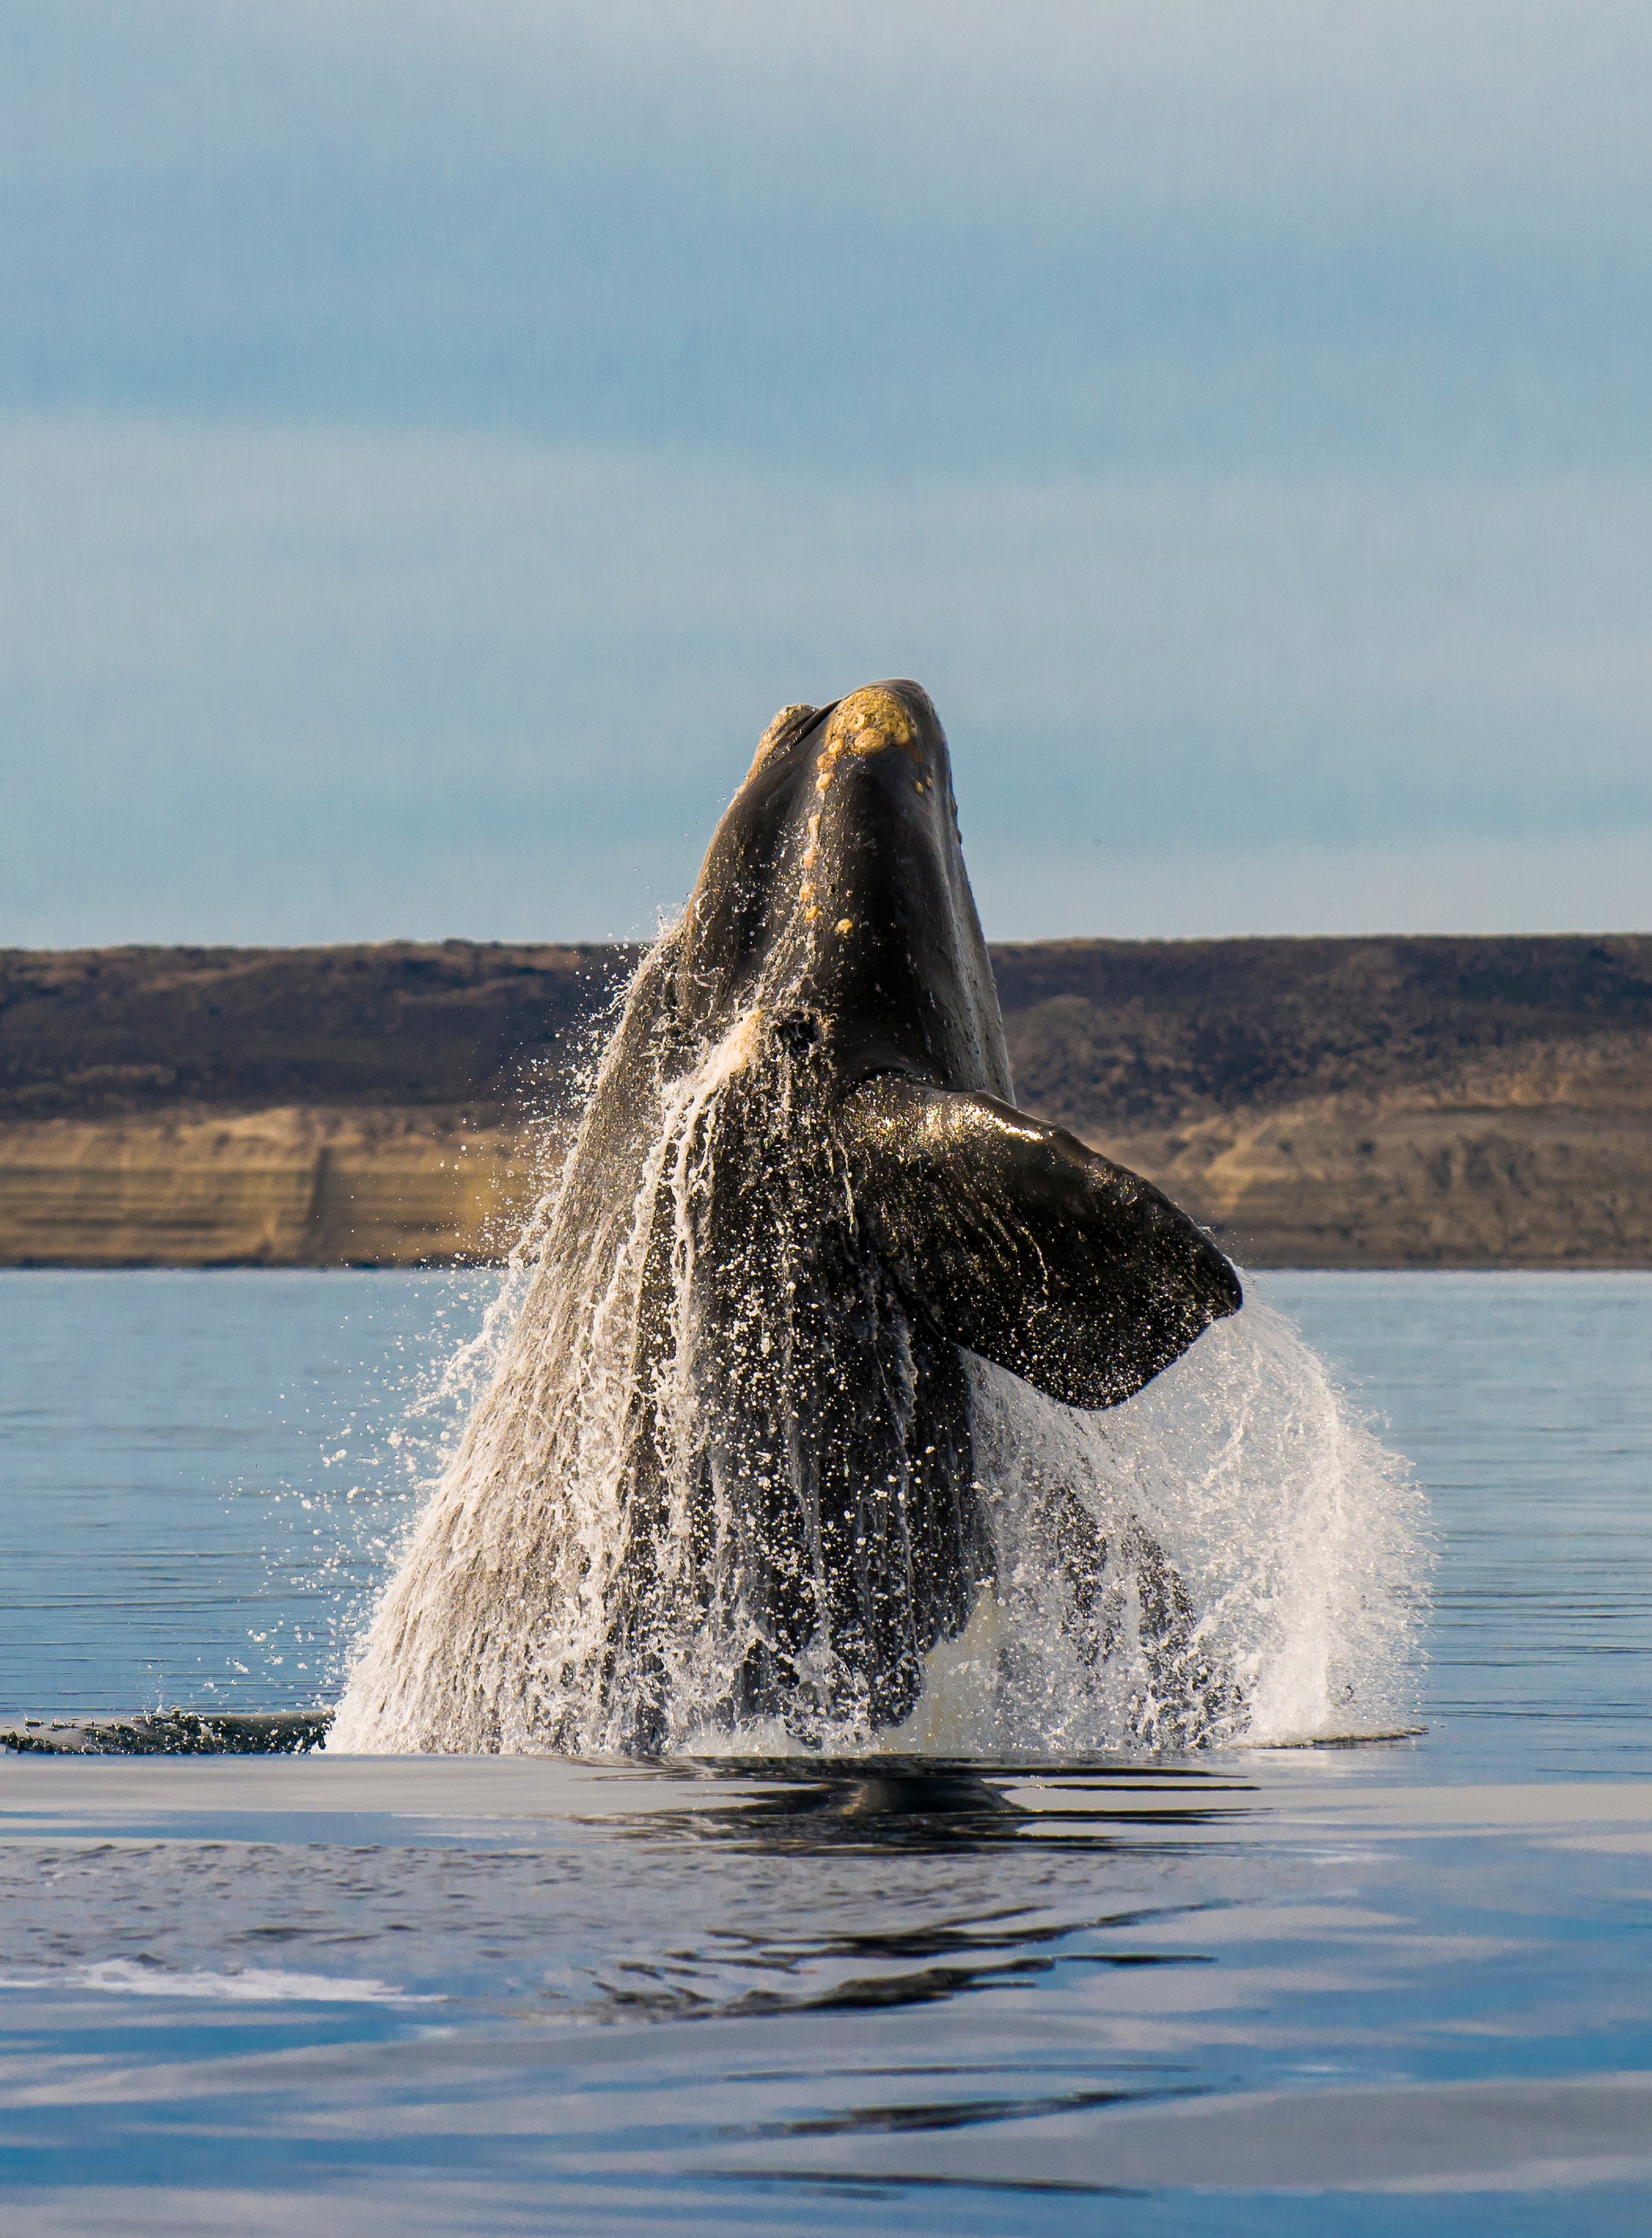 The Critically Endangered North Atlantic Right Whale